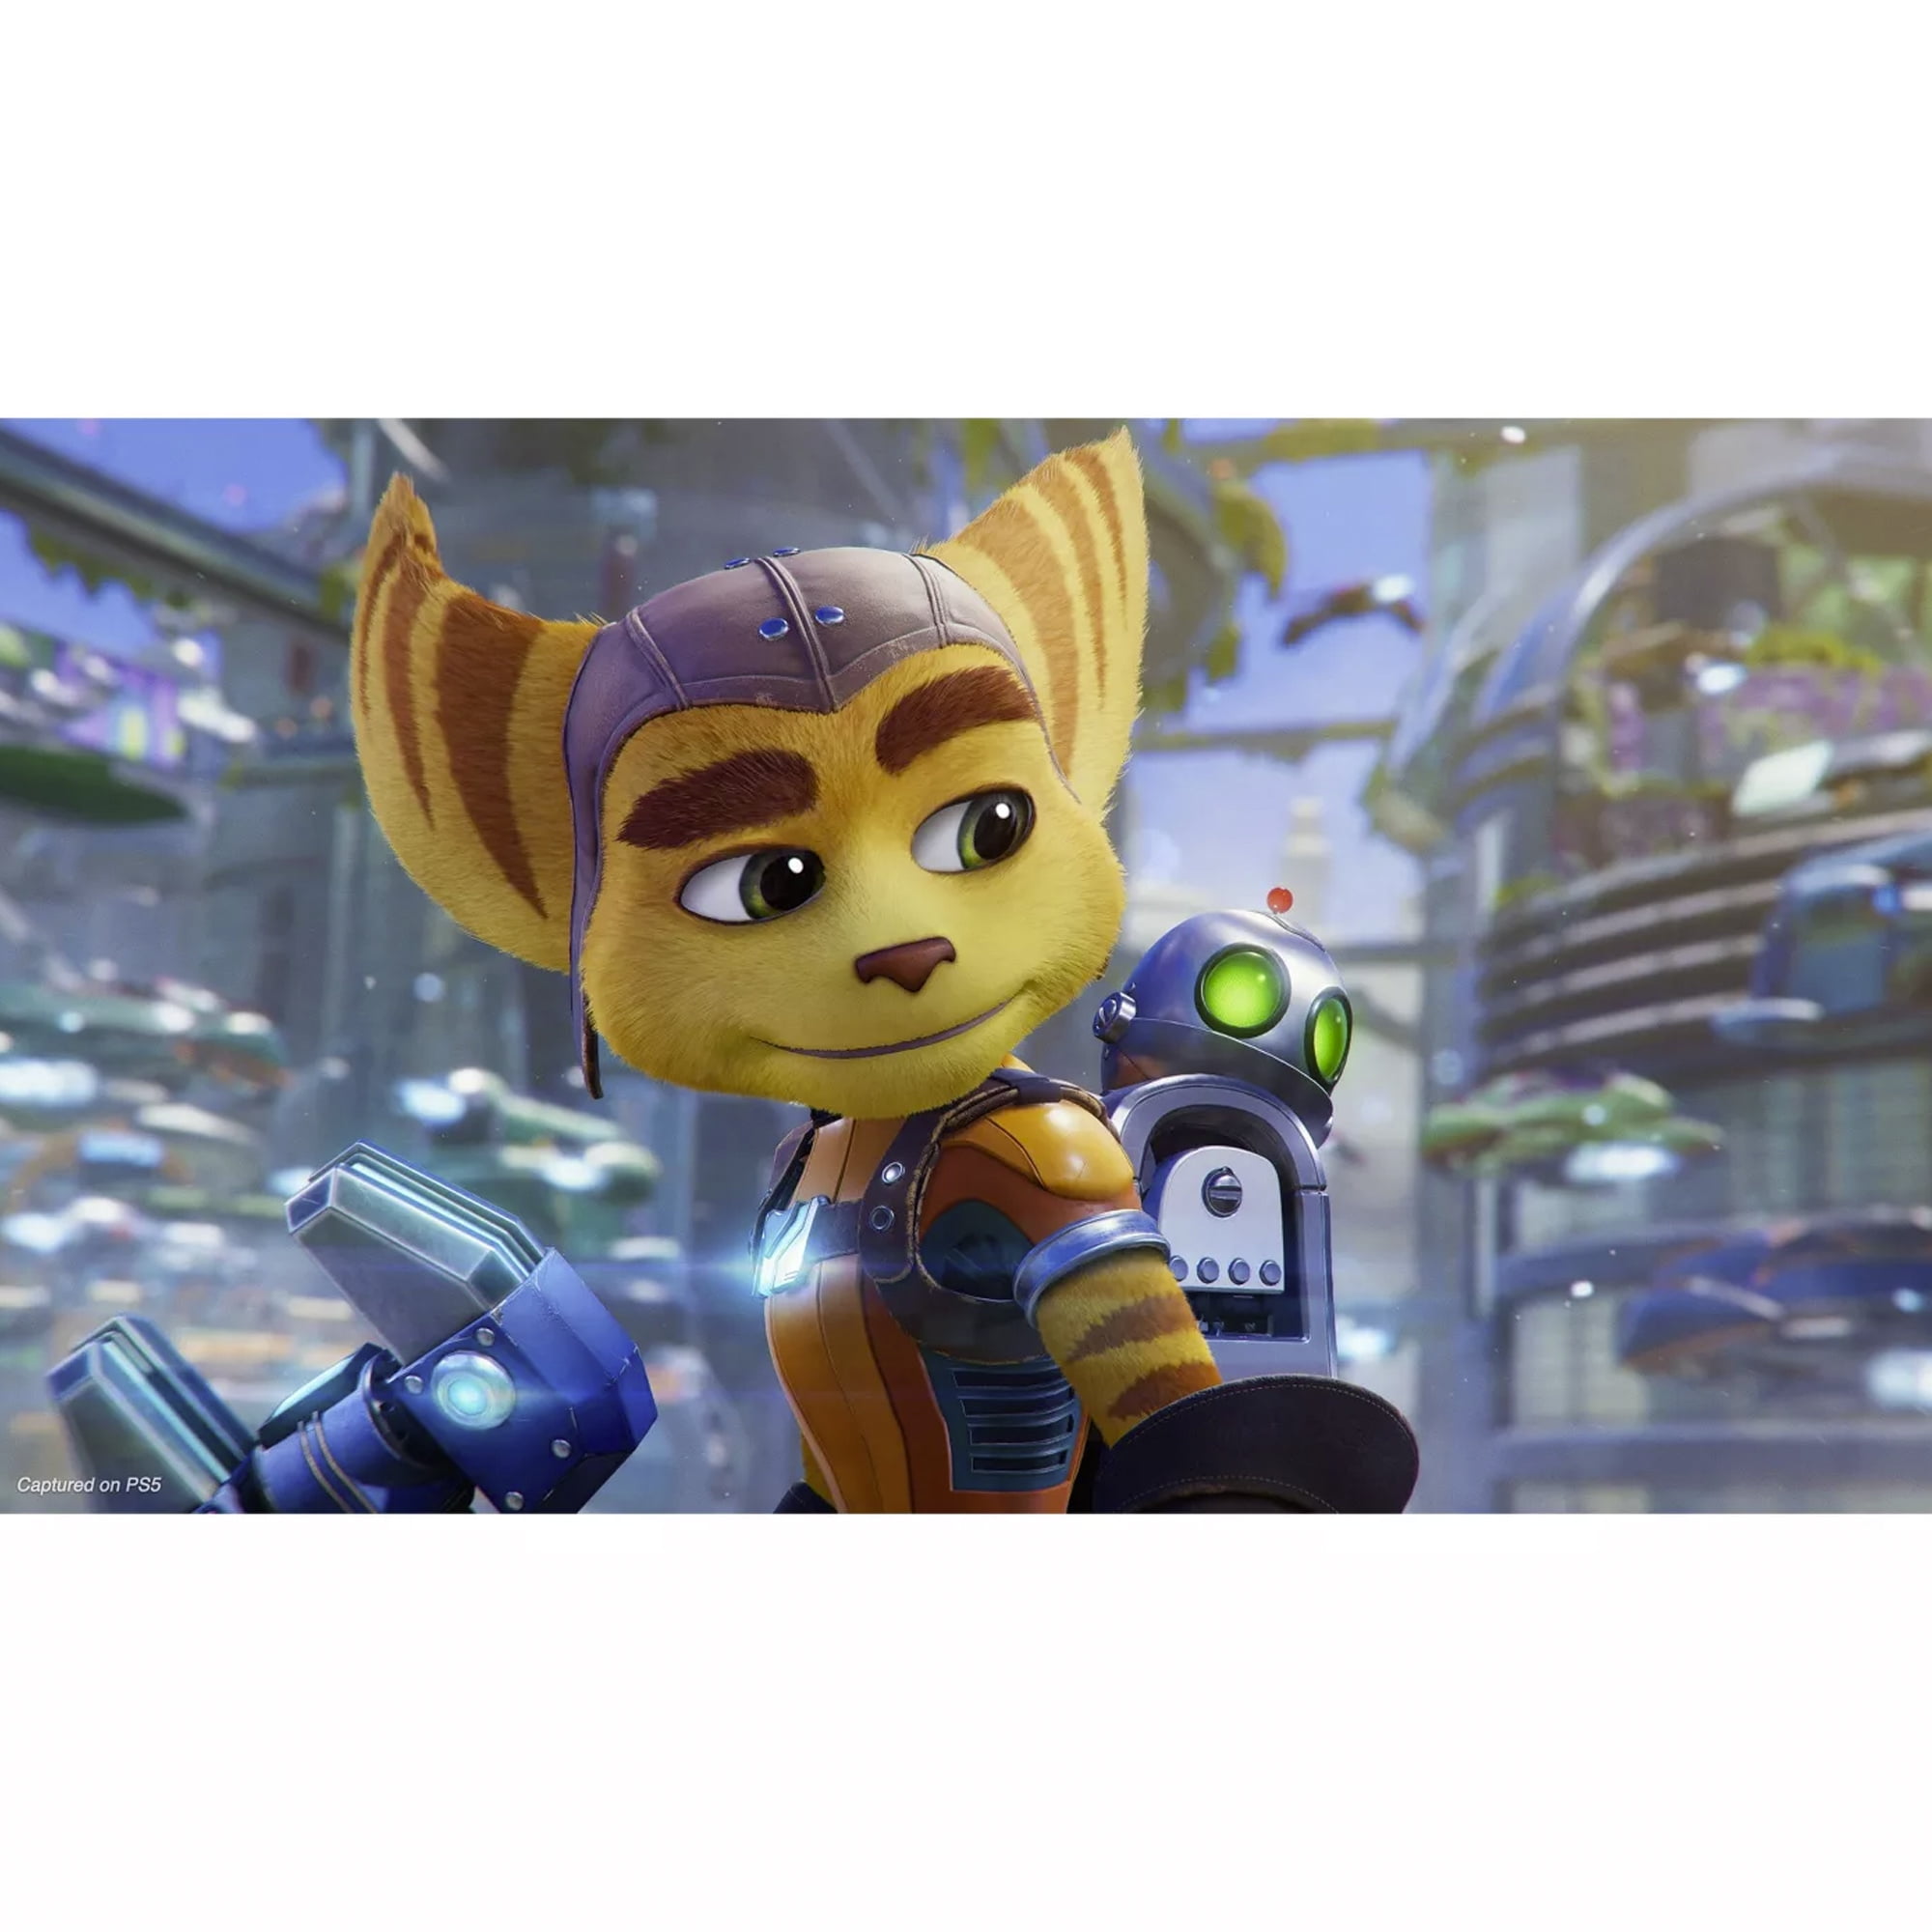 metacritic on X: With 92 pro critic reviews lodged so far, Ratchet & Clank:  Rift Apart (PS5) is sitting on a Metascore of 89:   At its core, it's still your trusty